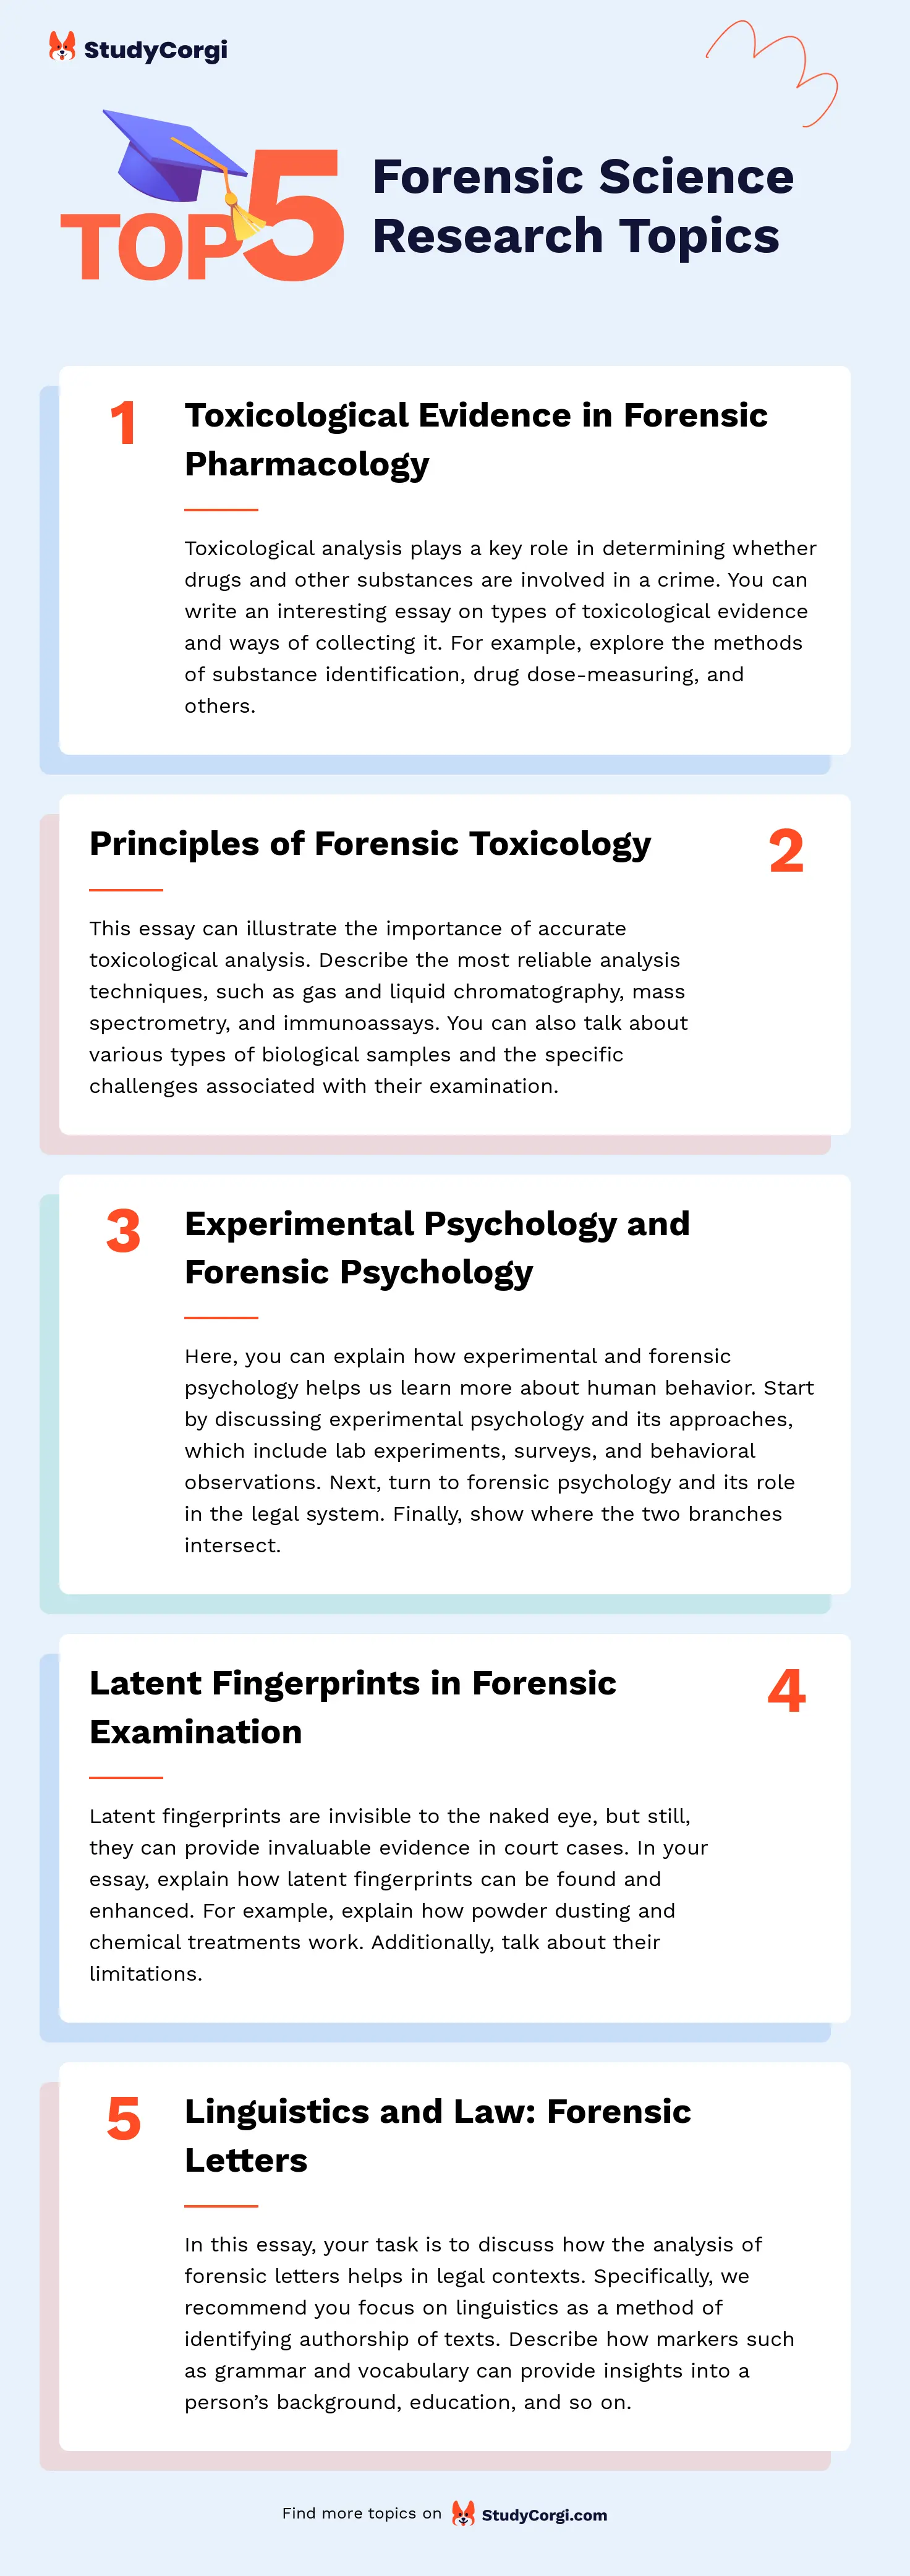 TOP-5 Forensic Science Research Topics